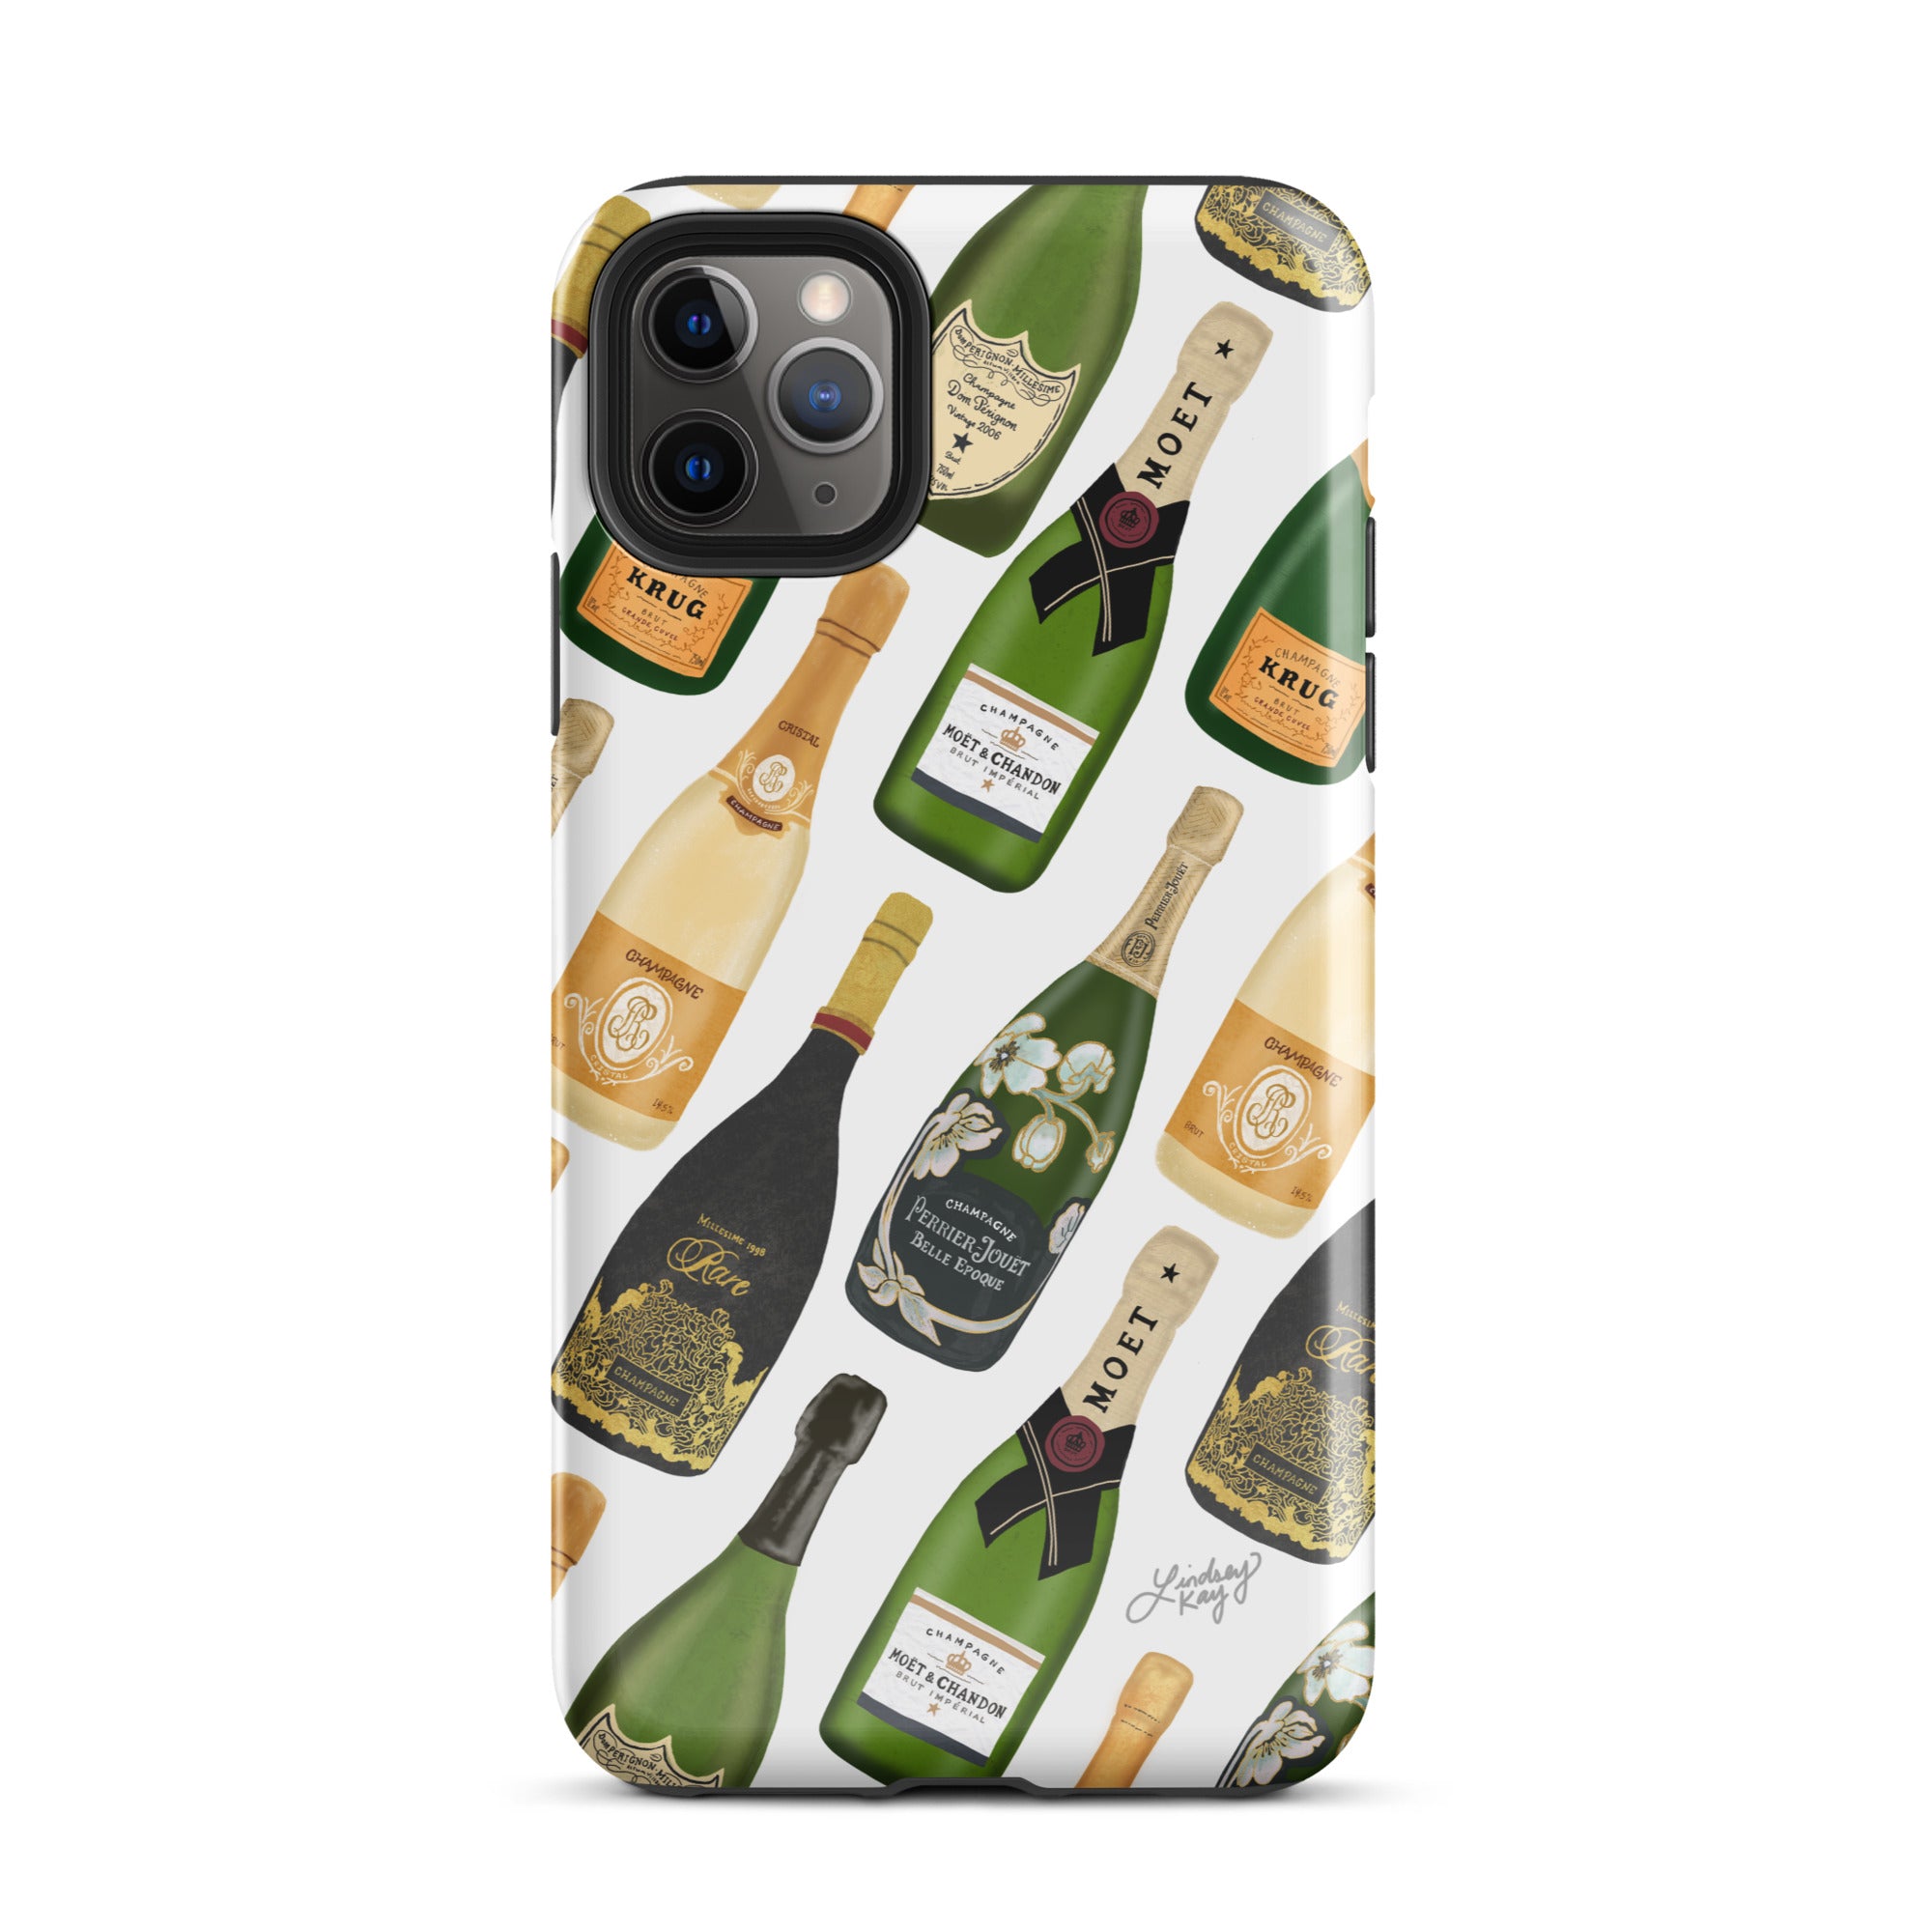 champagne bottles illustration pattern green alcohol pop fizzle click wine bottles iphone tough case cover protector iphone 15 bachelorette gift party favor